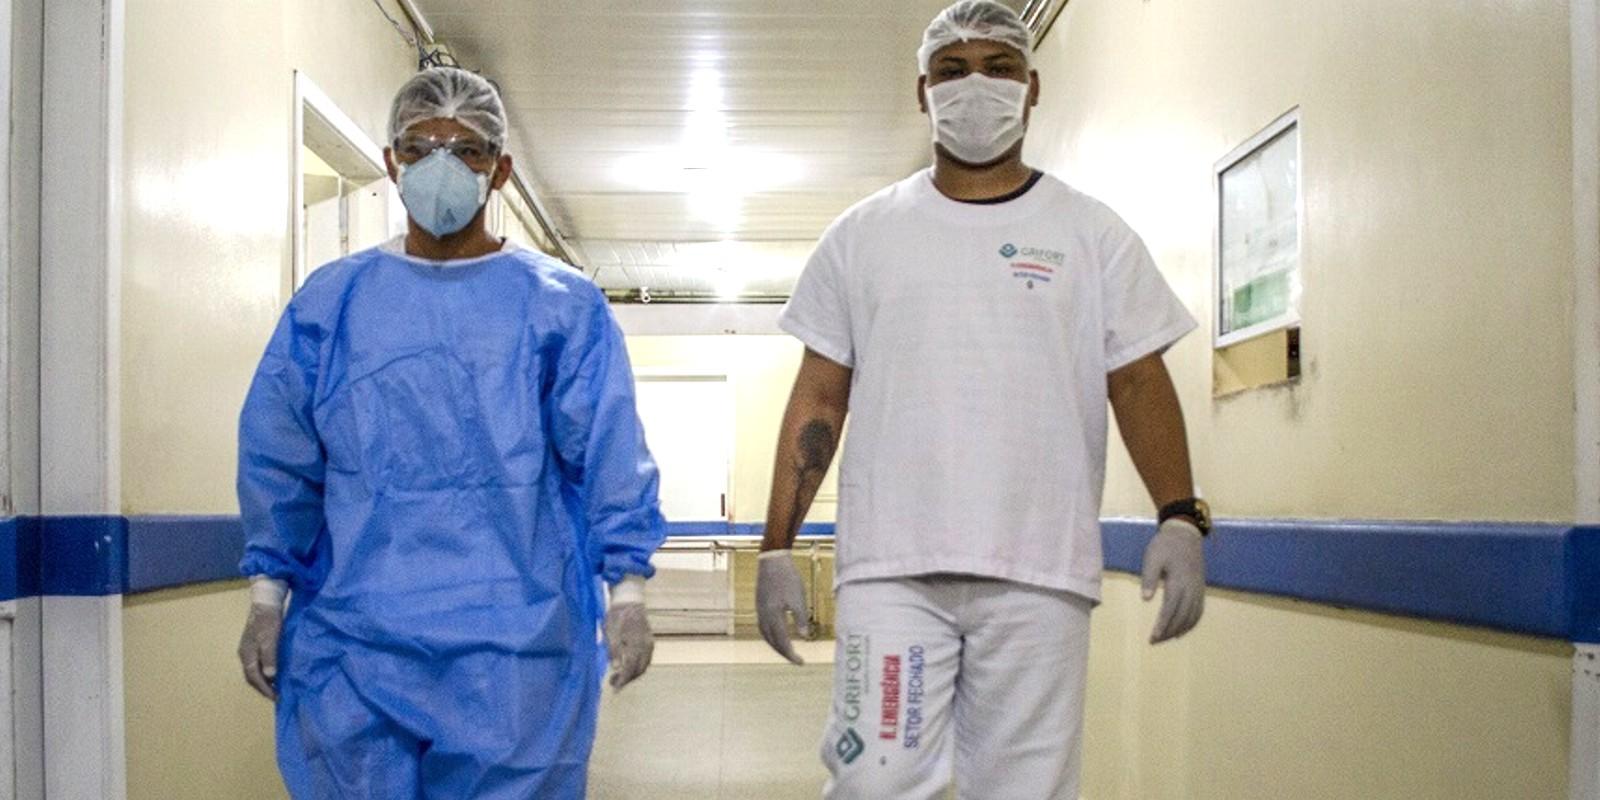 Although São Paulo is the state with the largest number of medical supplies, according to the Ministry of Health, Minister Luiz Henrique Mandetta acknowledged on Thursday the difficulty in purchasing materials such as masks, due to the overheated international demand caused by the pandemic.